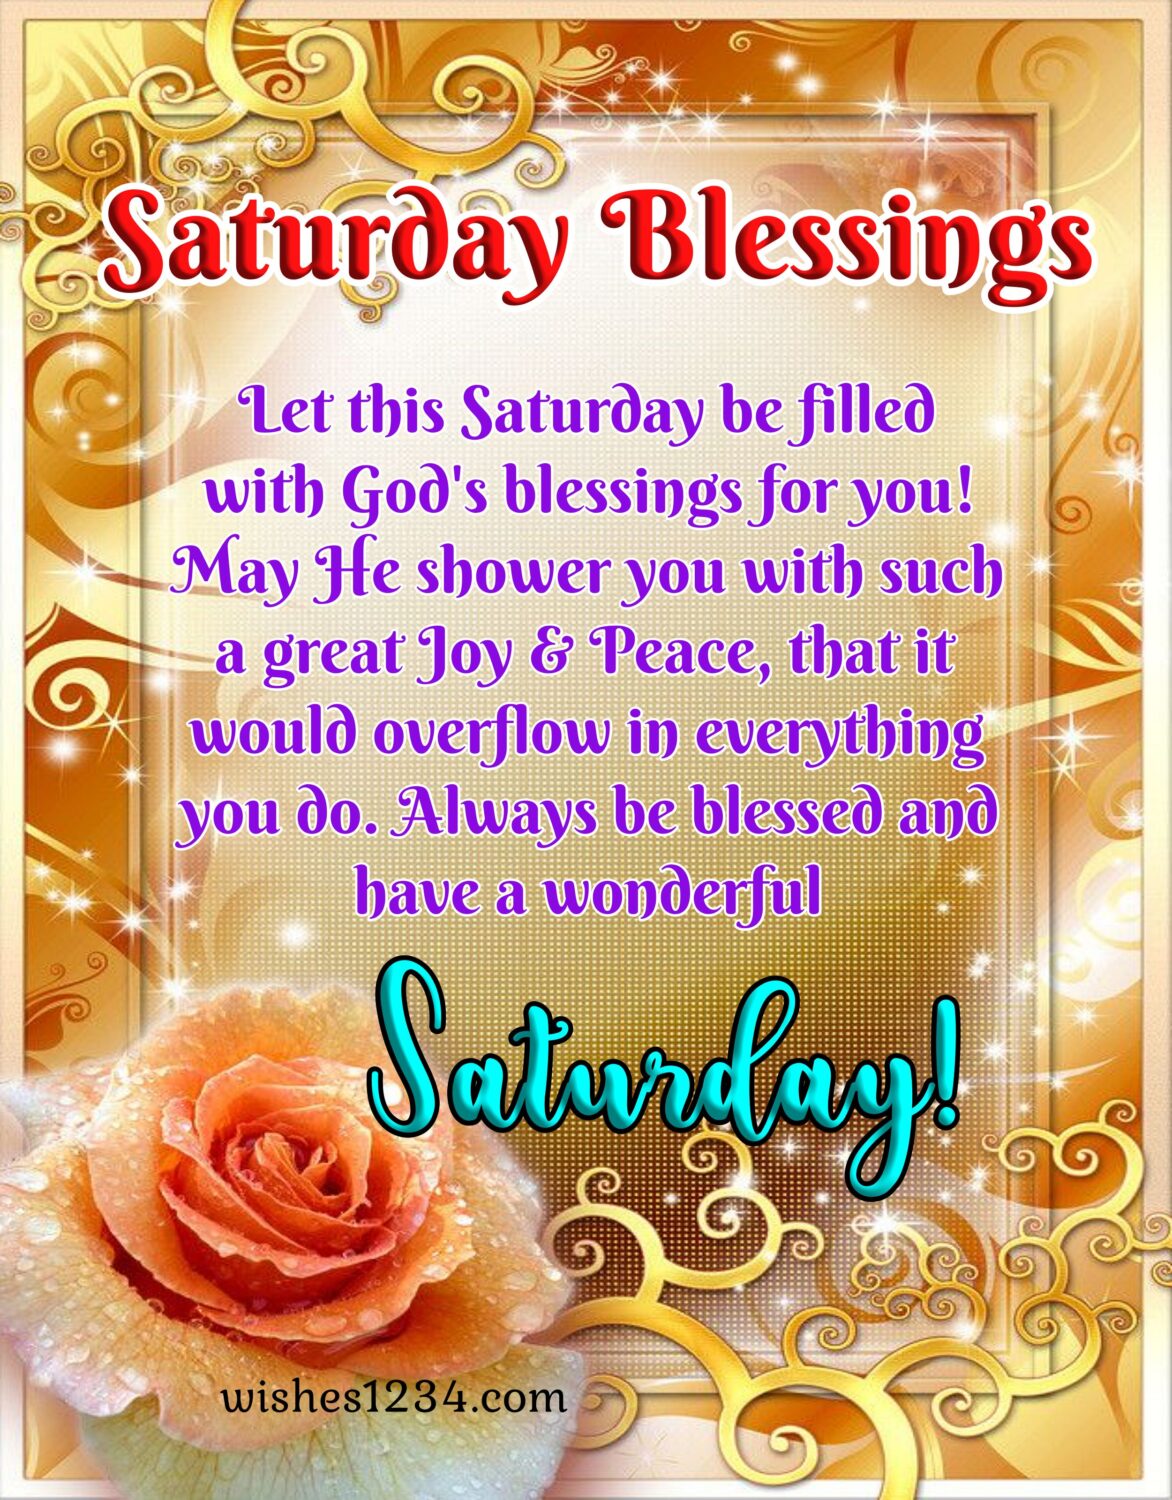 Saturday blessings with golden design background.